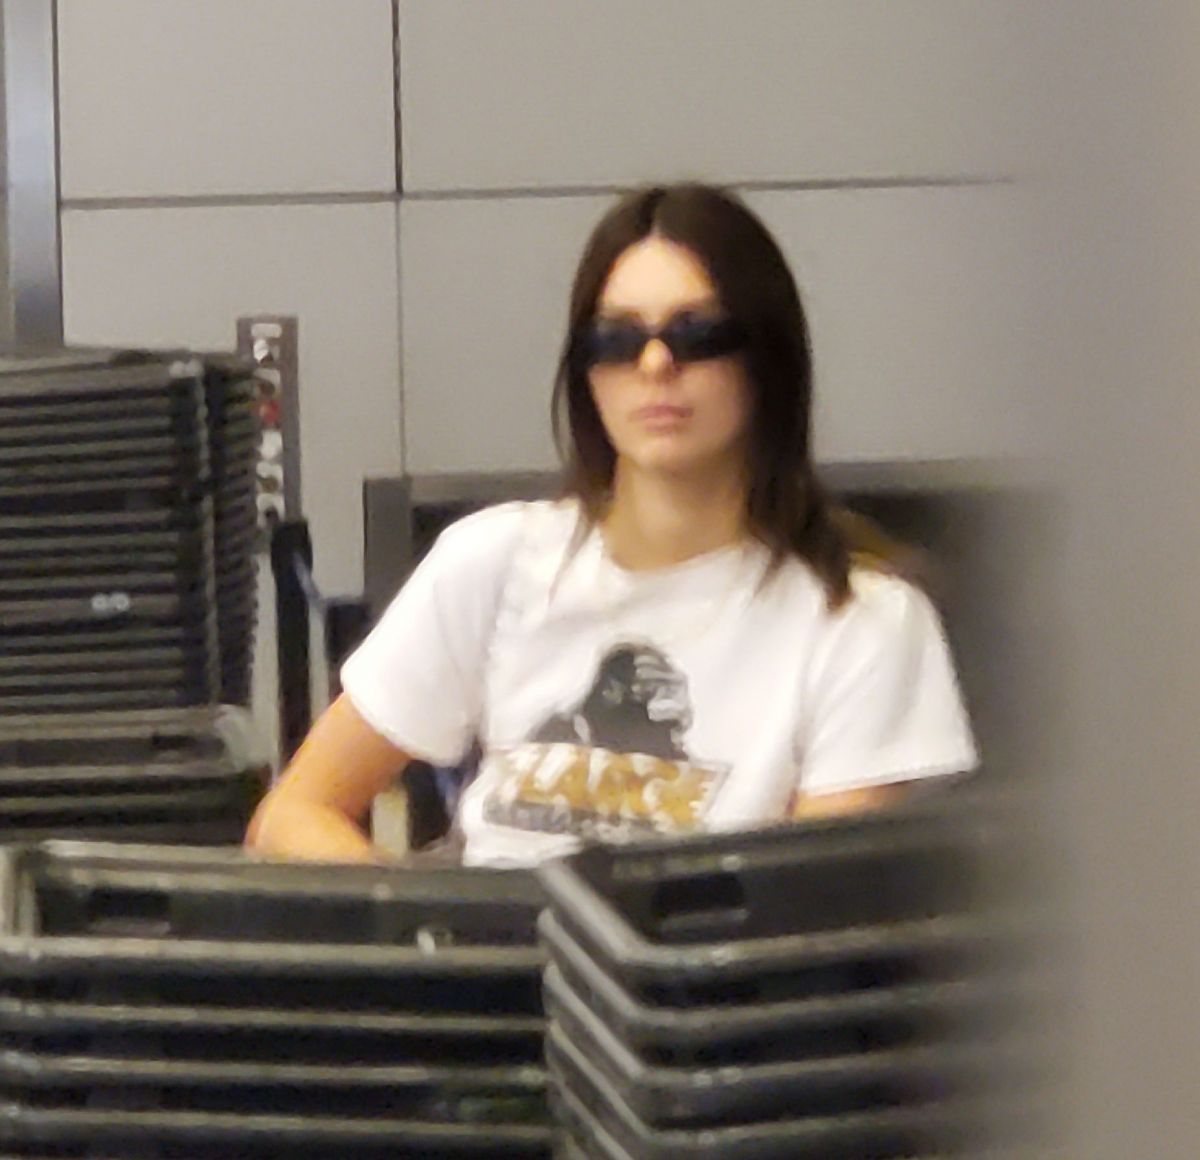 KENDALL JENNER at Los Angeles International Airport 10/25/2019 – HawtCelebs